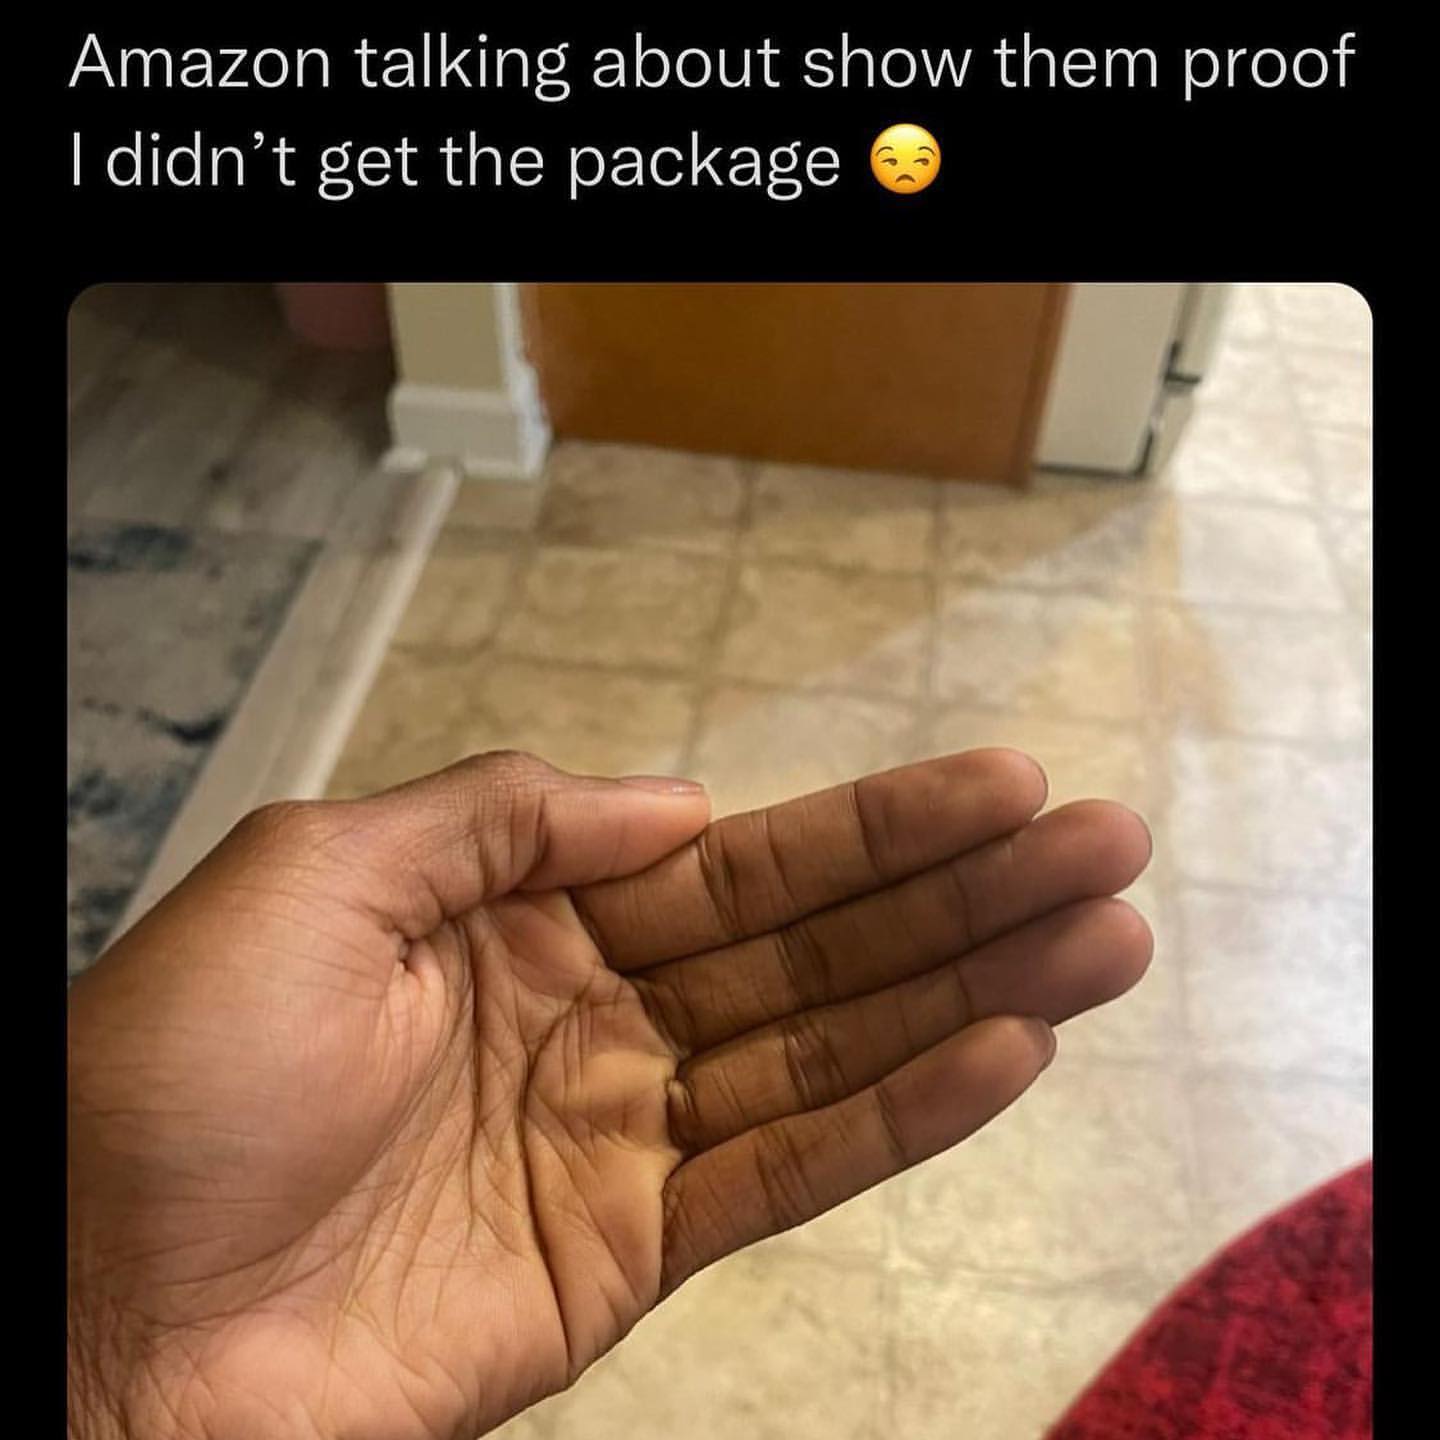 Amazon talking about show them proof. I didn't get the package.